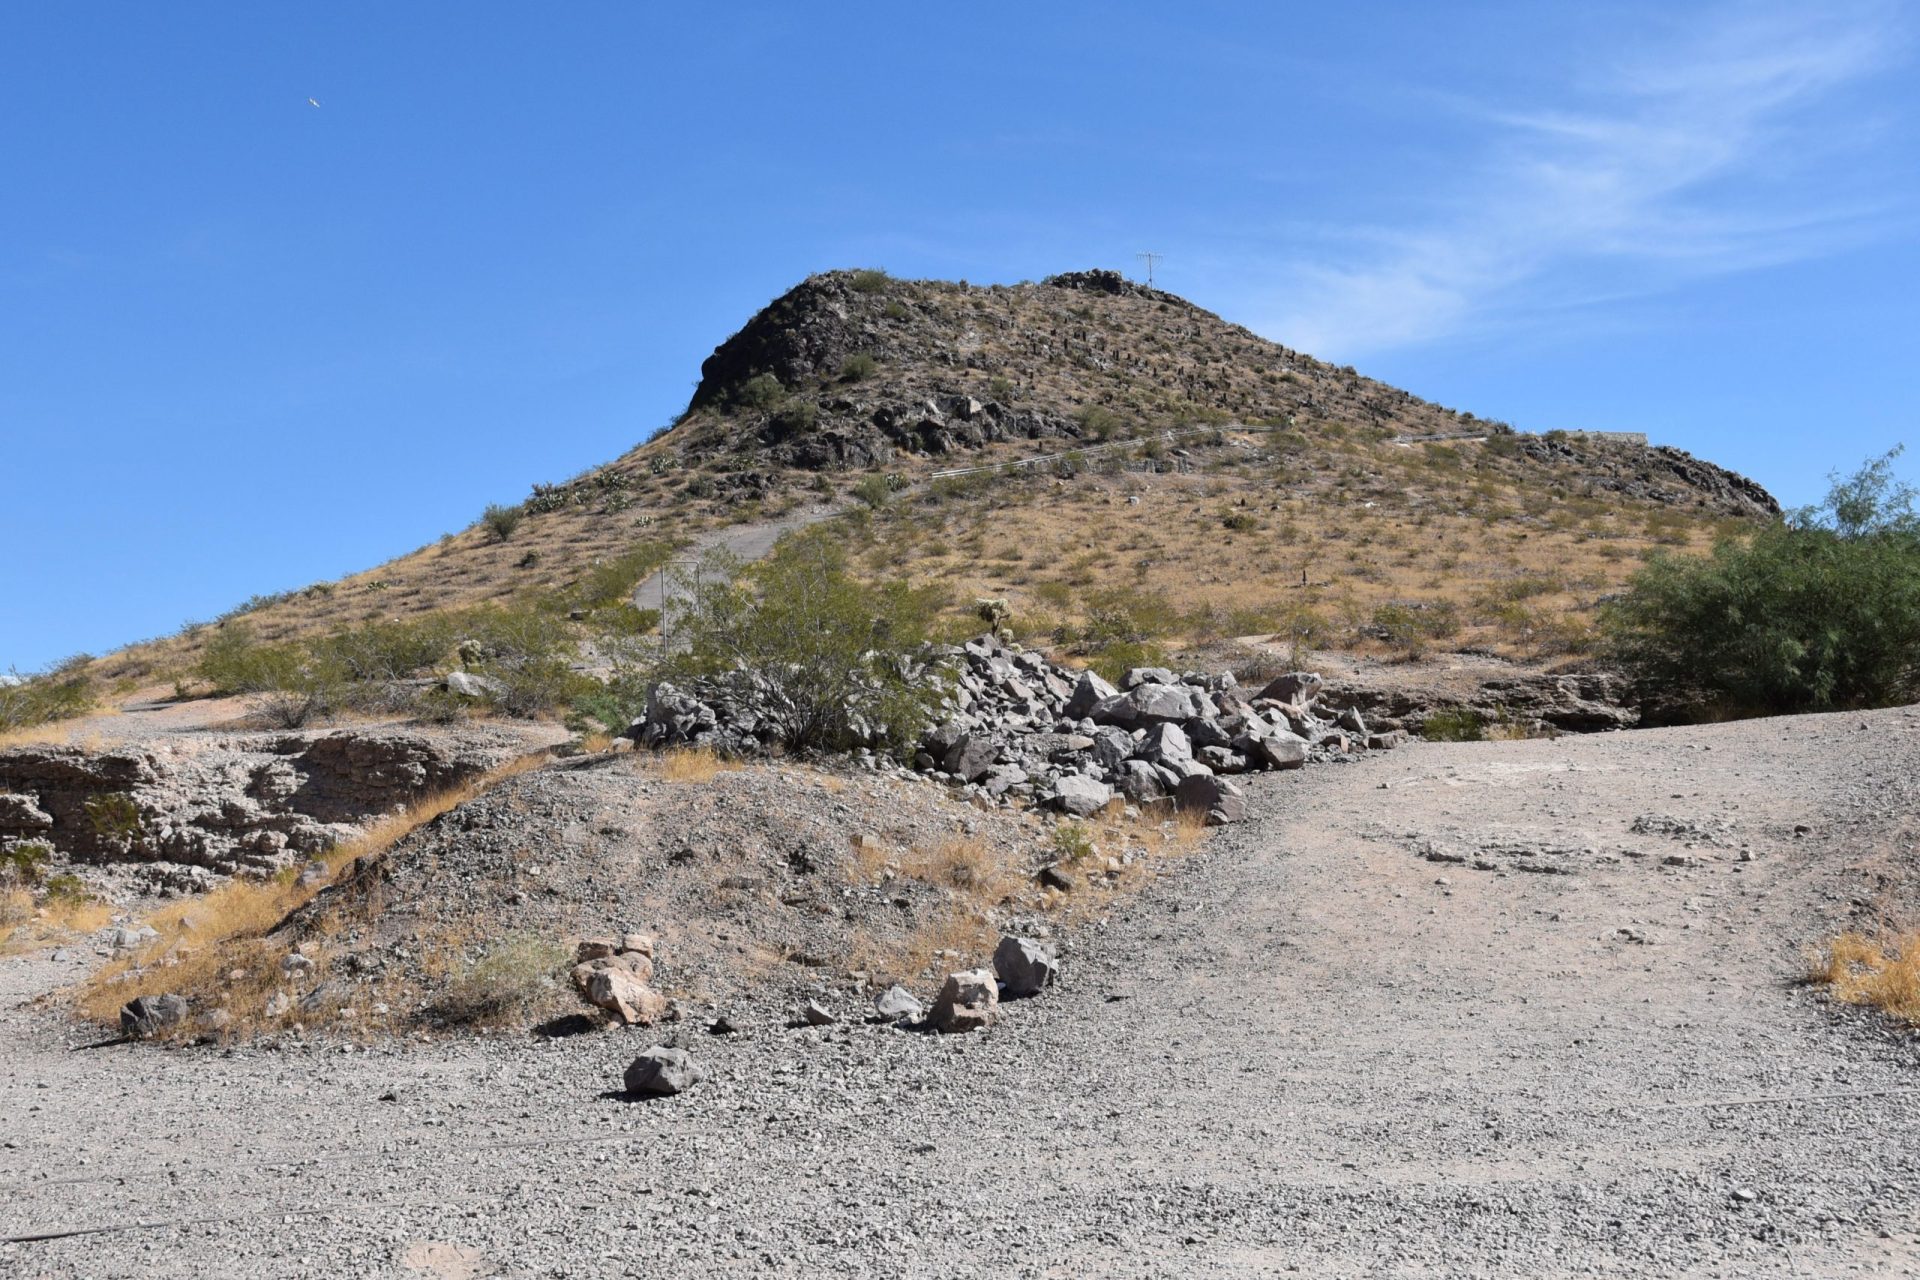 Community Continues to Monitor Educational Park Plan at Tempe Butte